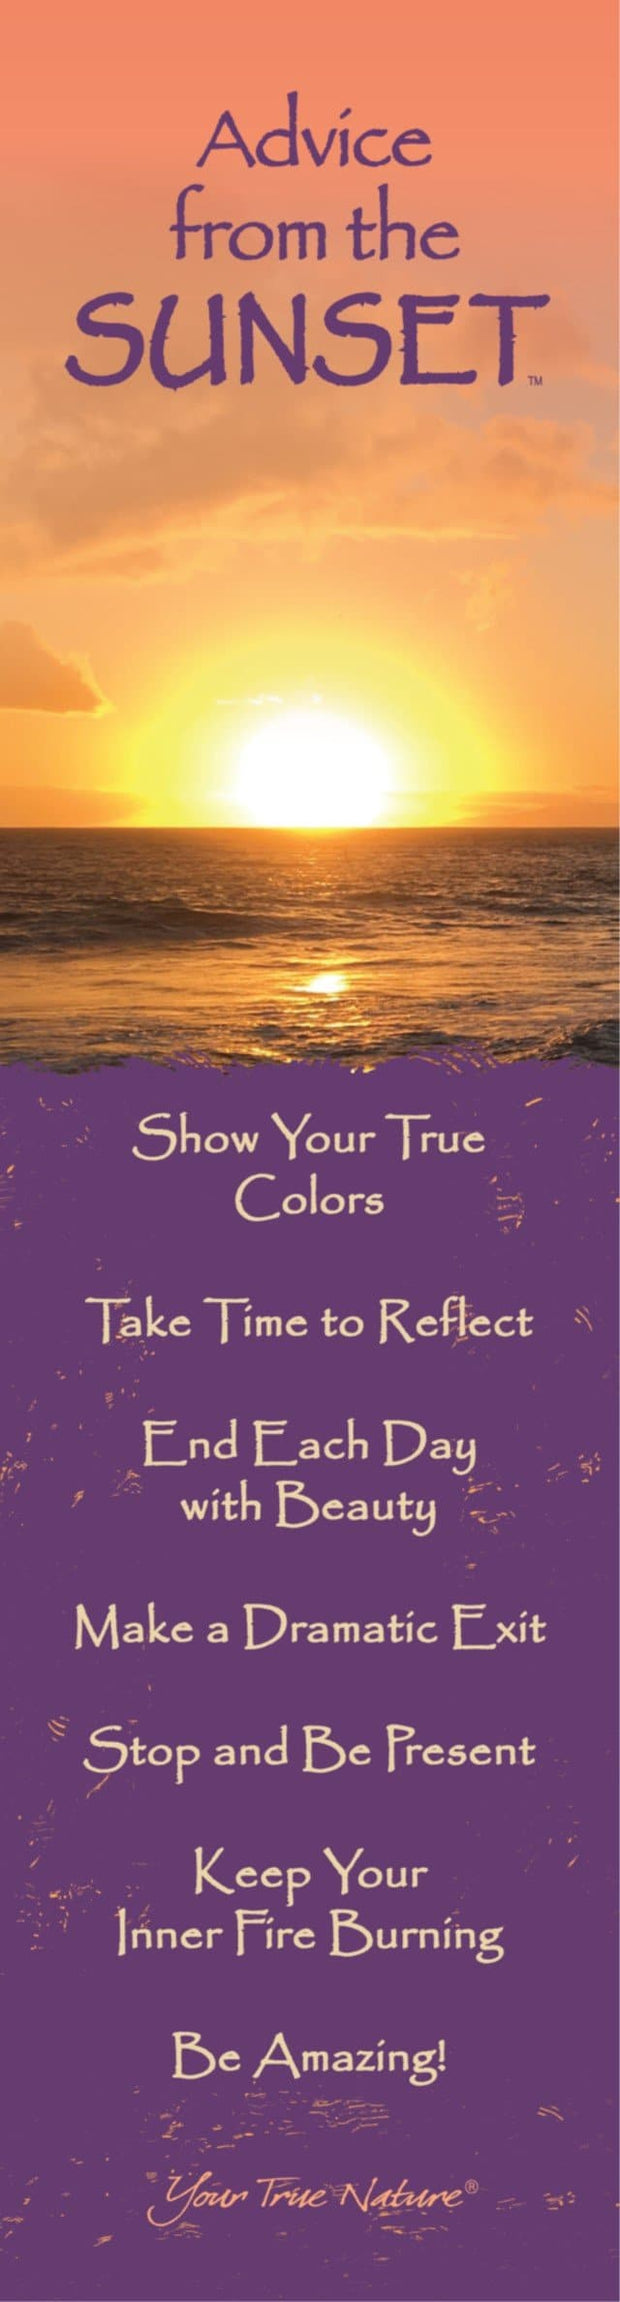 Advice from a Sunset Beach Laminated Bookmark